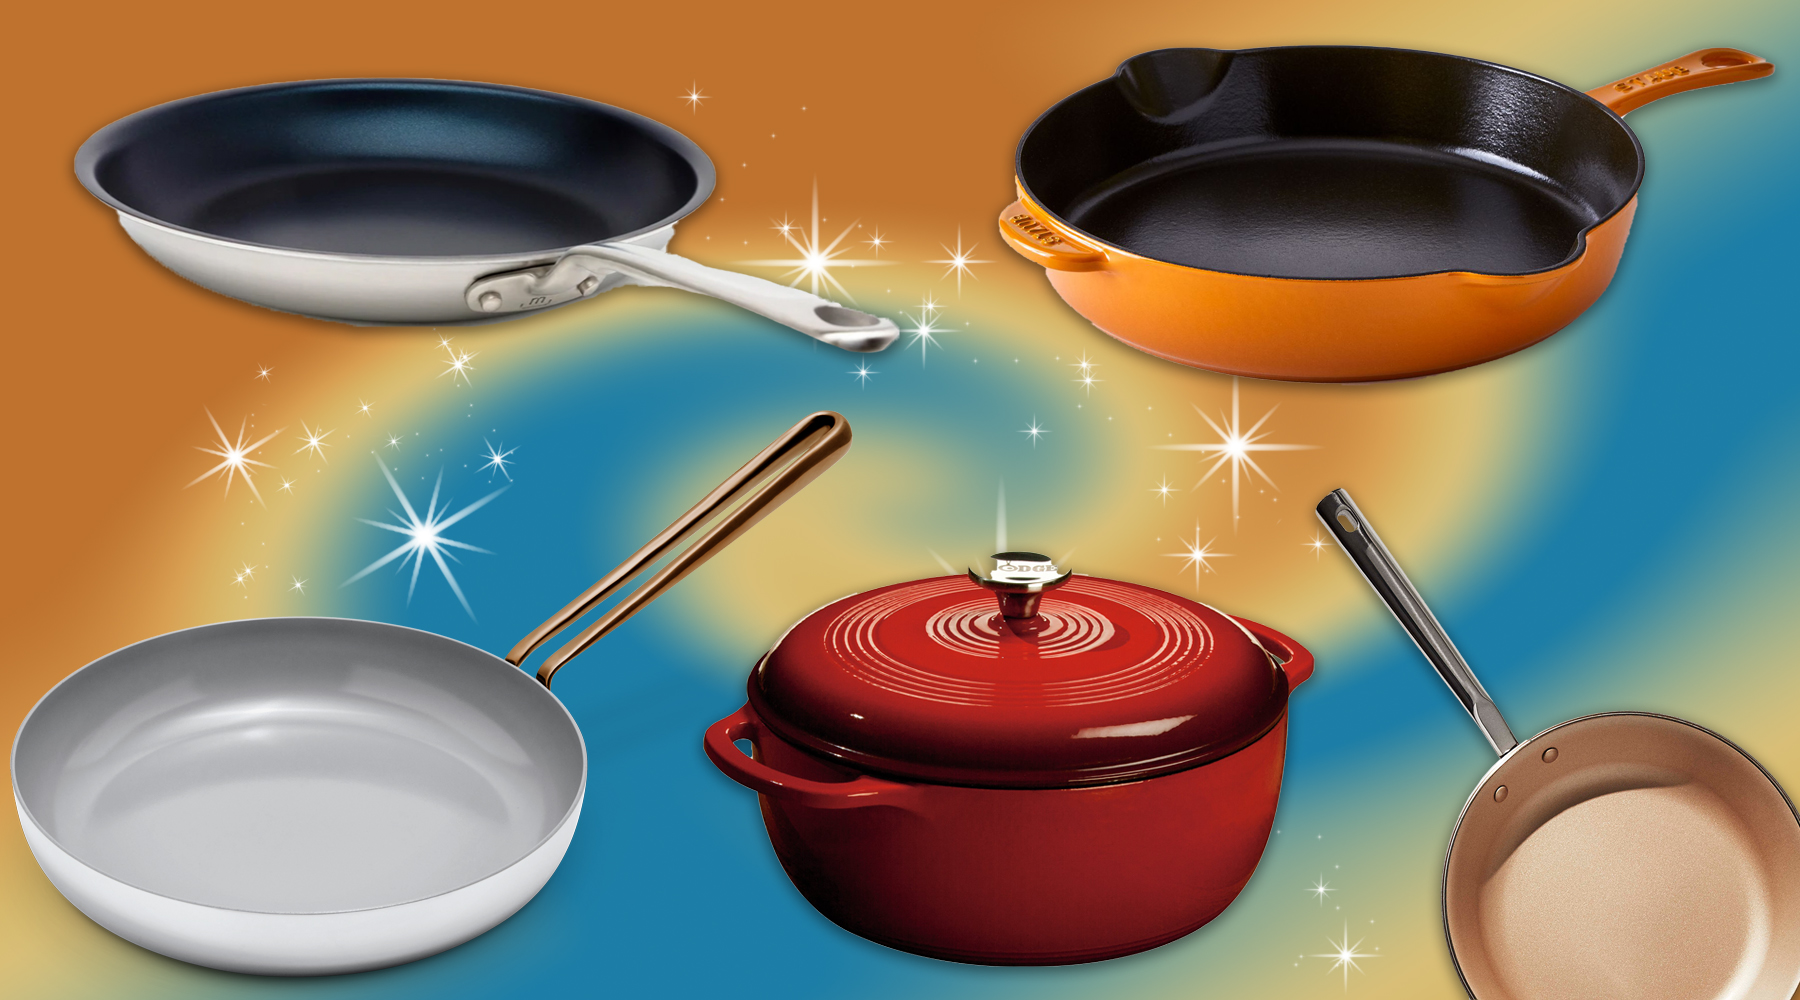 Whatever pan: Here is why it sold out five times in 2019